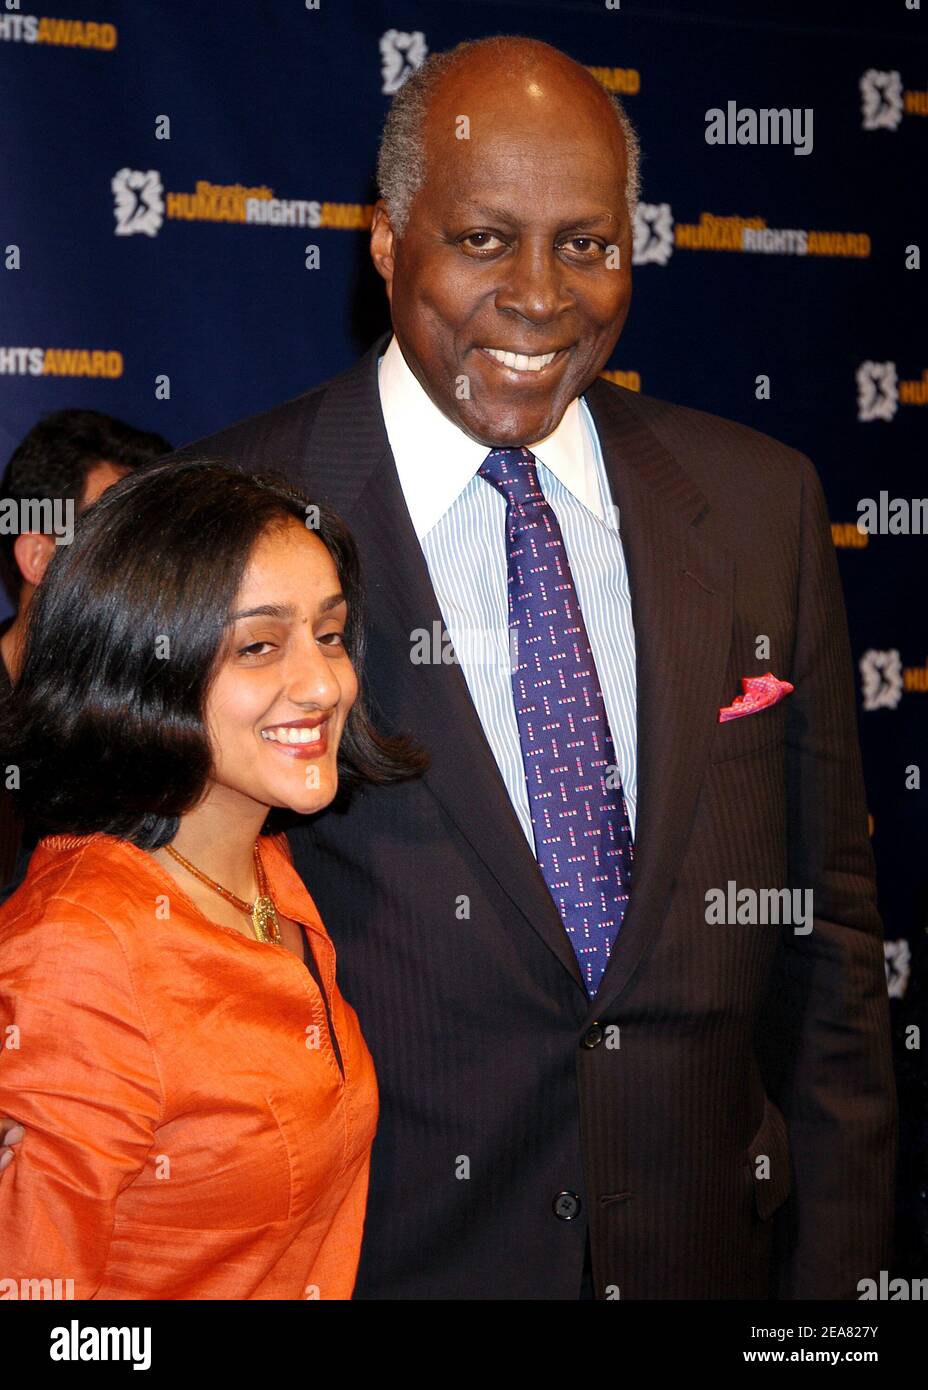 Vanita Gupta and Vernon Jordan attend the press conference for the 2004 Reebok Human Rights Awards, at Lincoln Center, New York, NY, USA - May 5, 2004. (pictured: Vanita Gupta, Vernon Jordan) Photo by Antoine Cau/Abaca Stock Photo